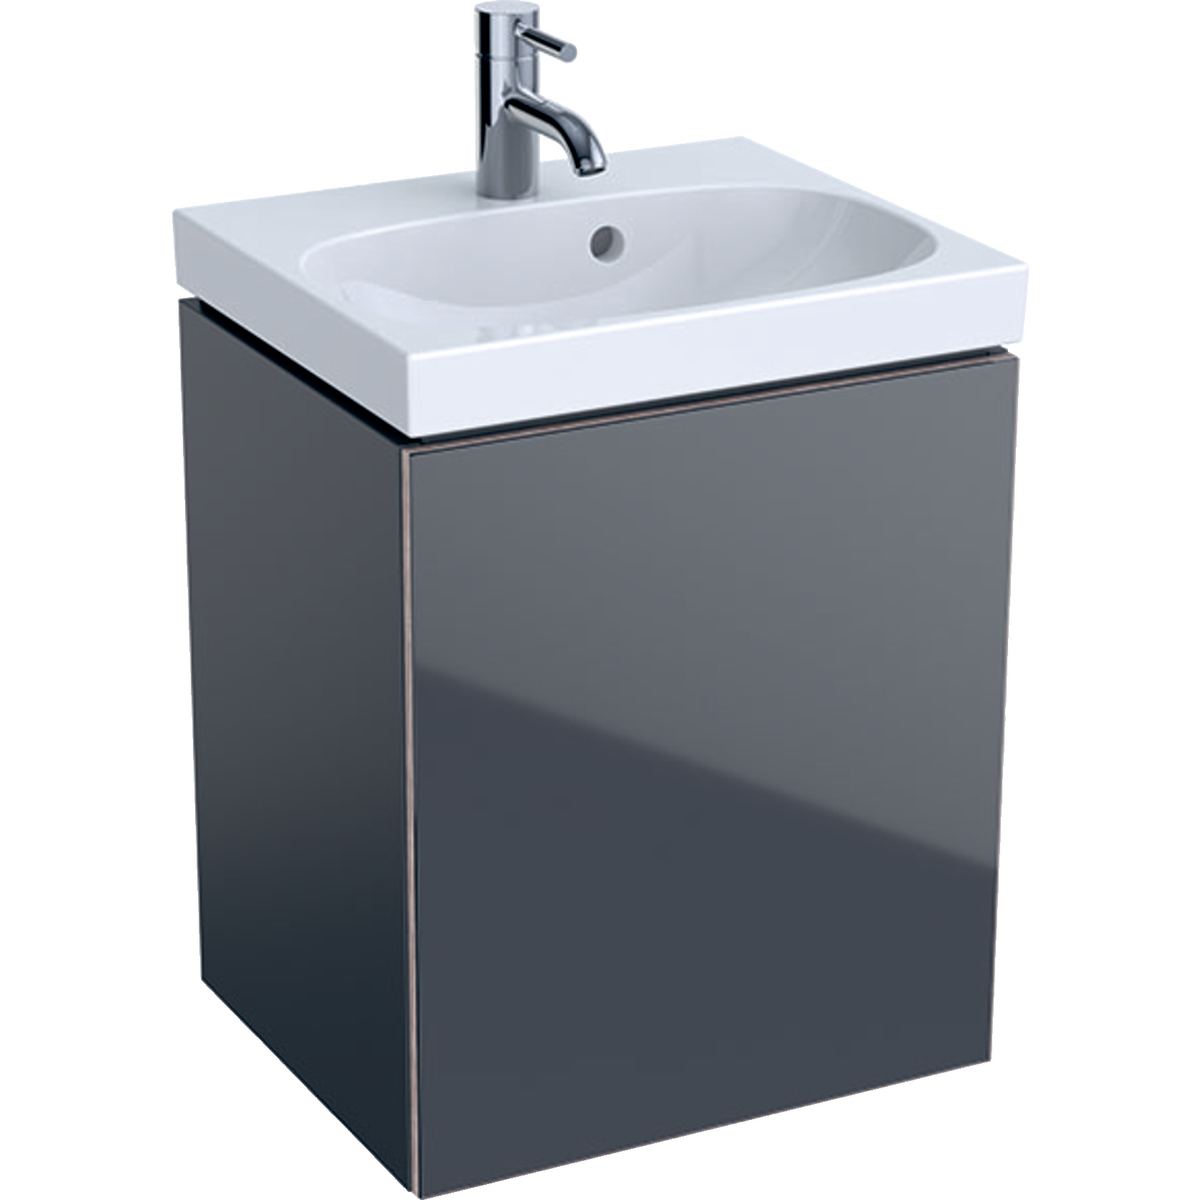 Geberit 500608JK2 Acanto Compact 445mm Cloakroom Vanity Unit - Lava (Basin and Brassware NOT Included)